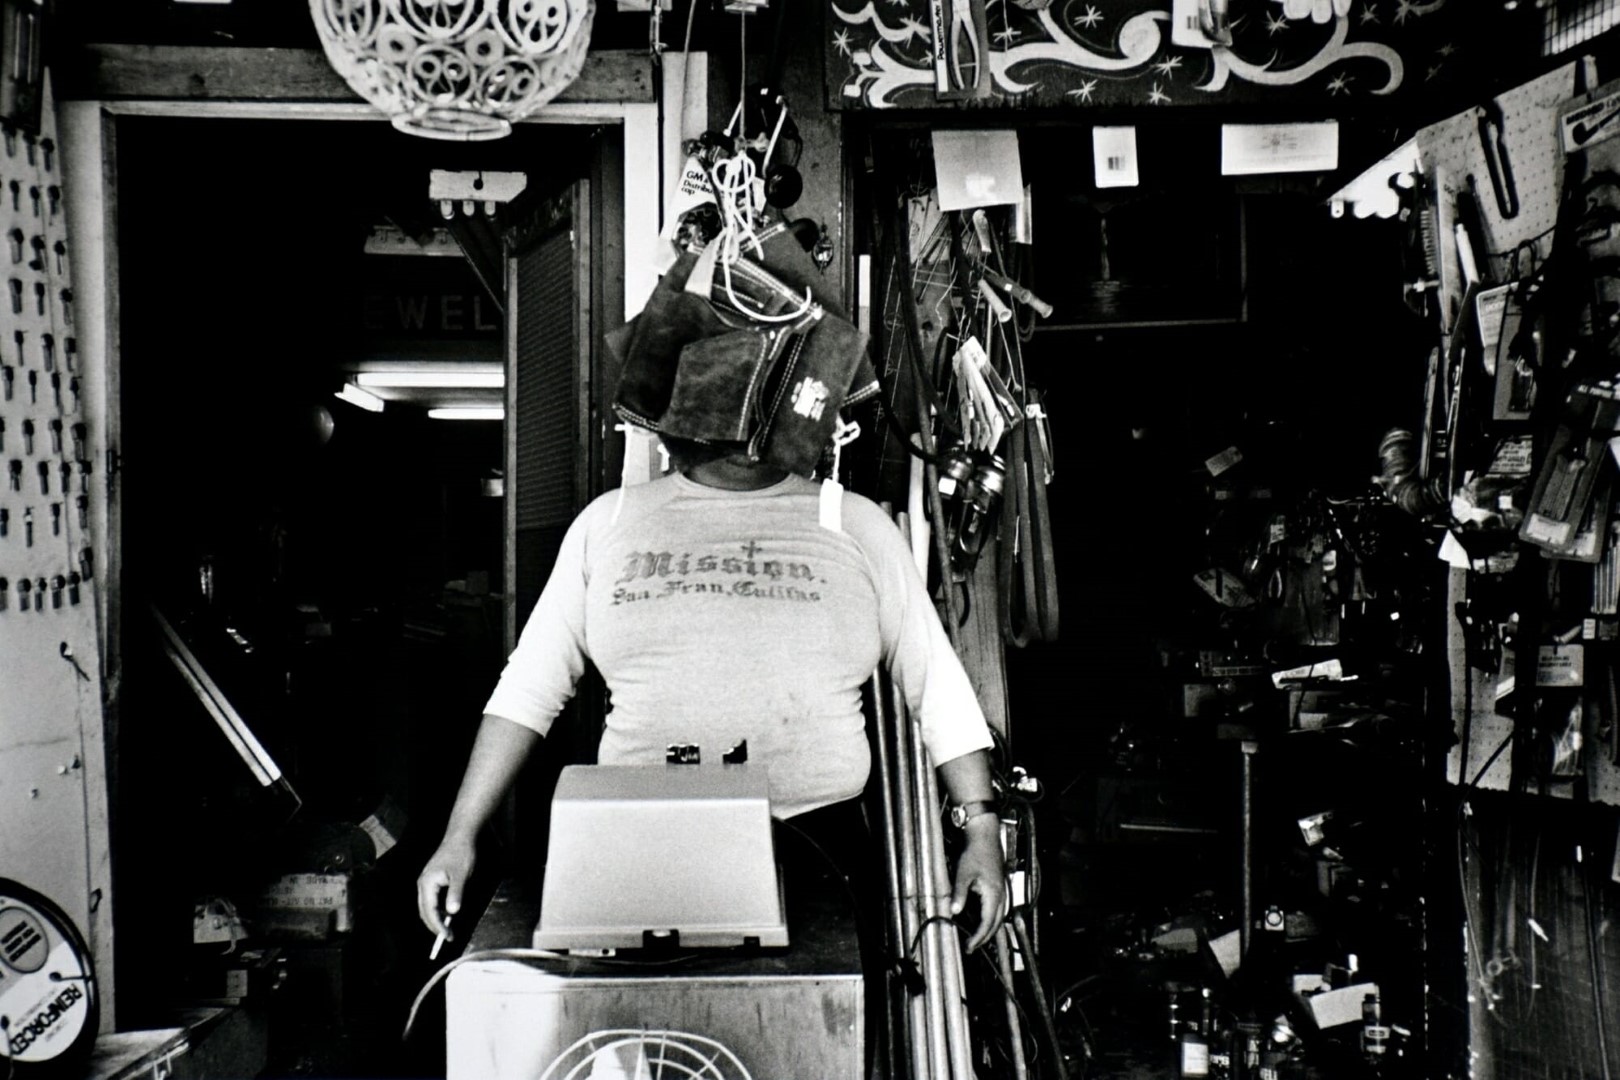 <span style="font-weight:normal;">Vendor on Mission Street, San Francisco, 1984</span>